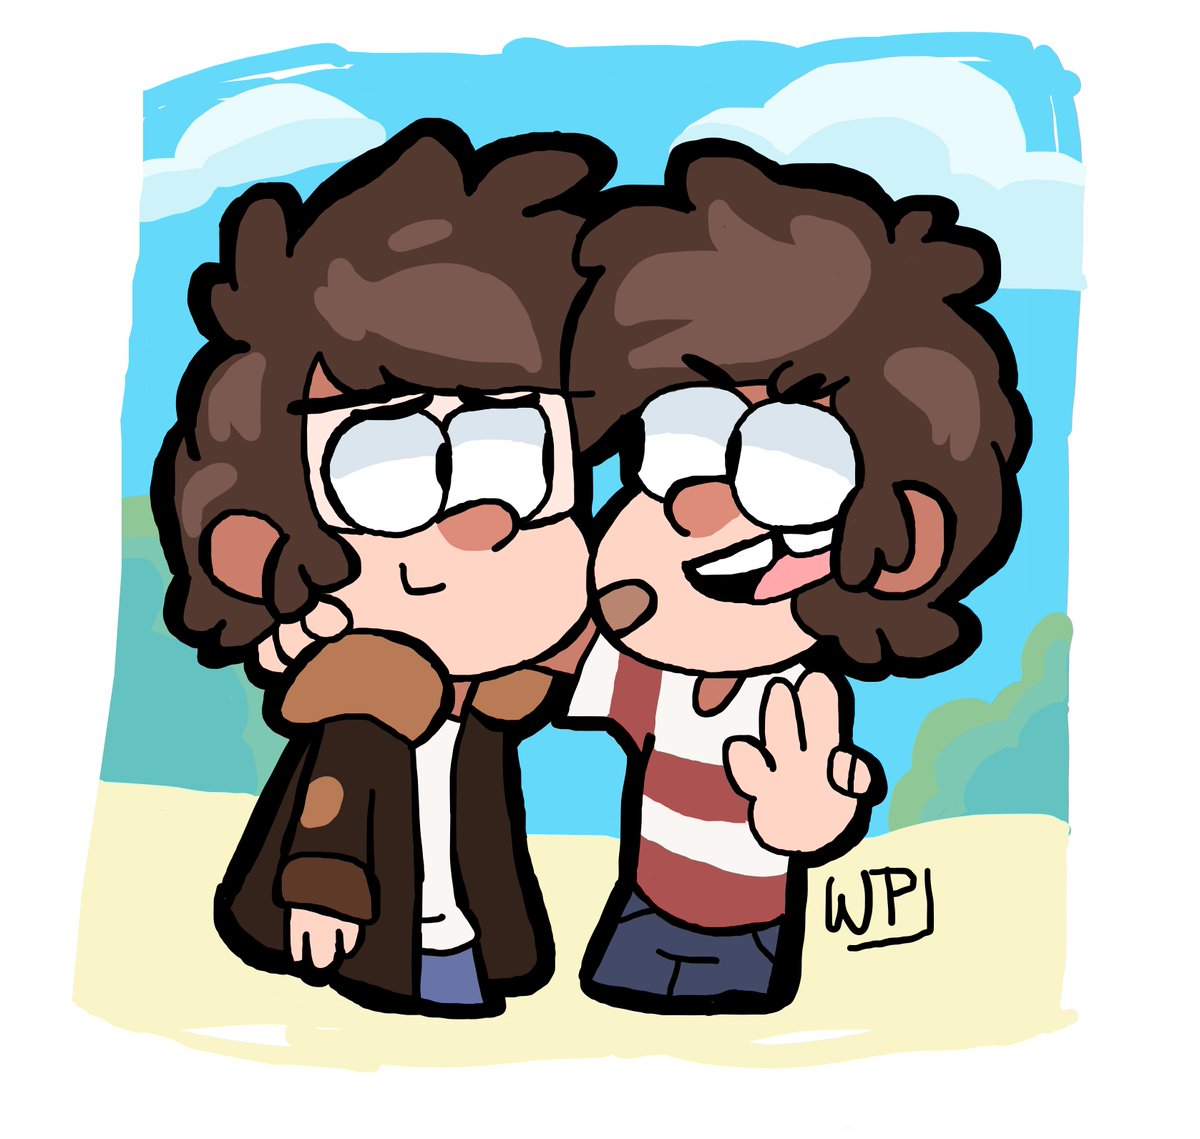 Stan and Ford version to match 🌊☀️
Also the first time I drew Stan and Ford together :P
#GravityFalls #gravityfallsfanart #StanleyPines #StanfordPines